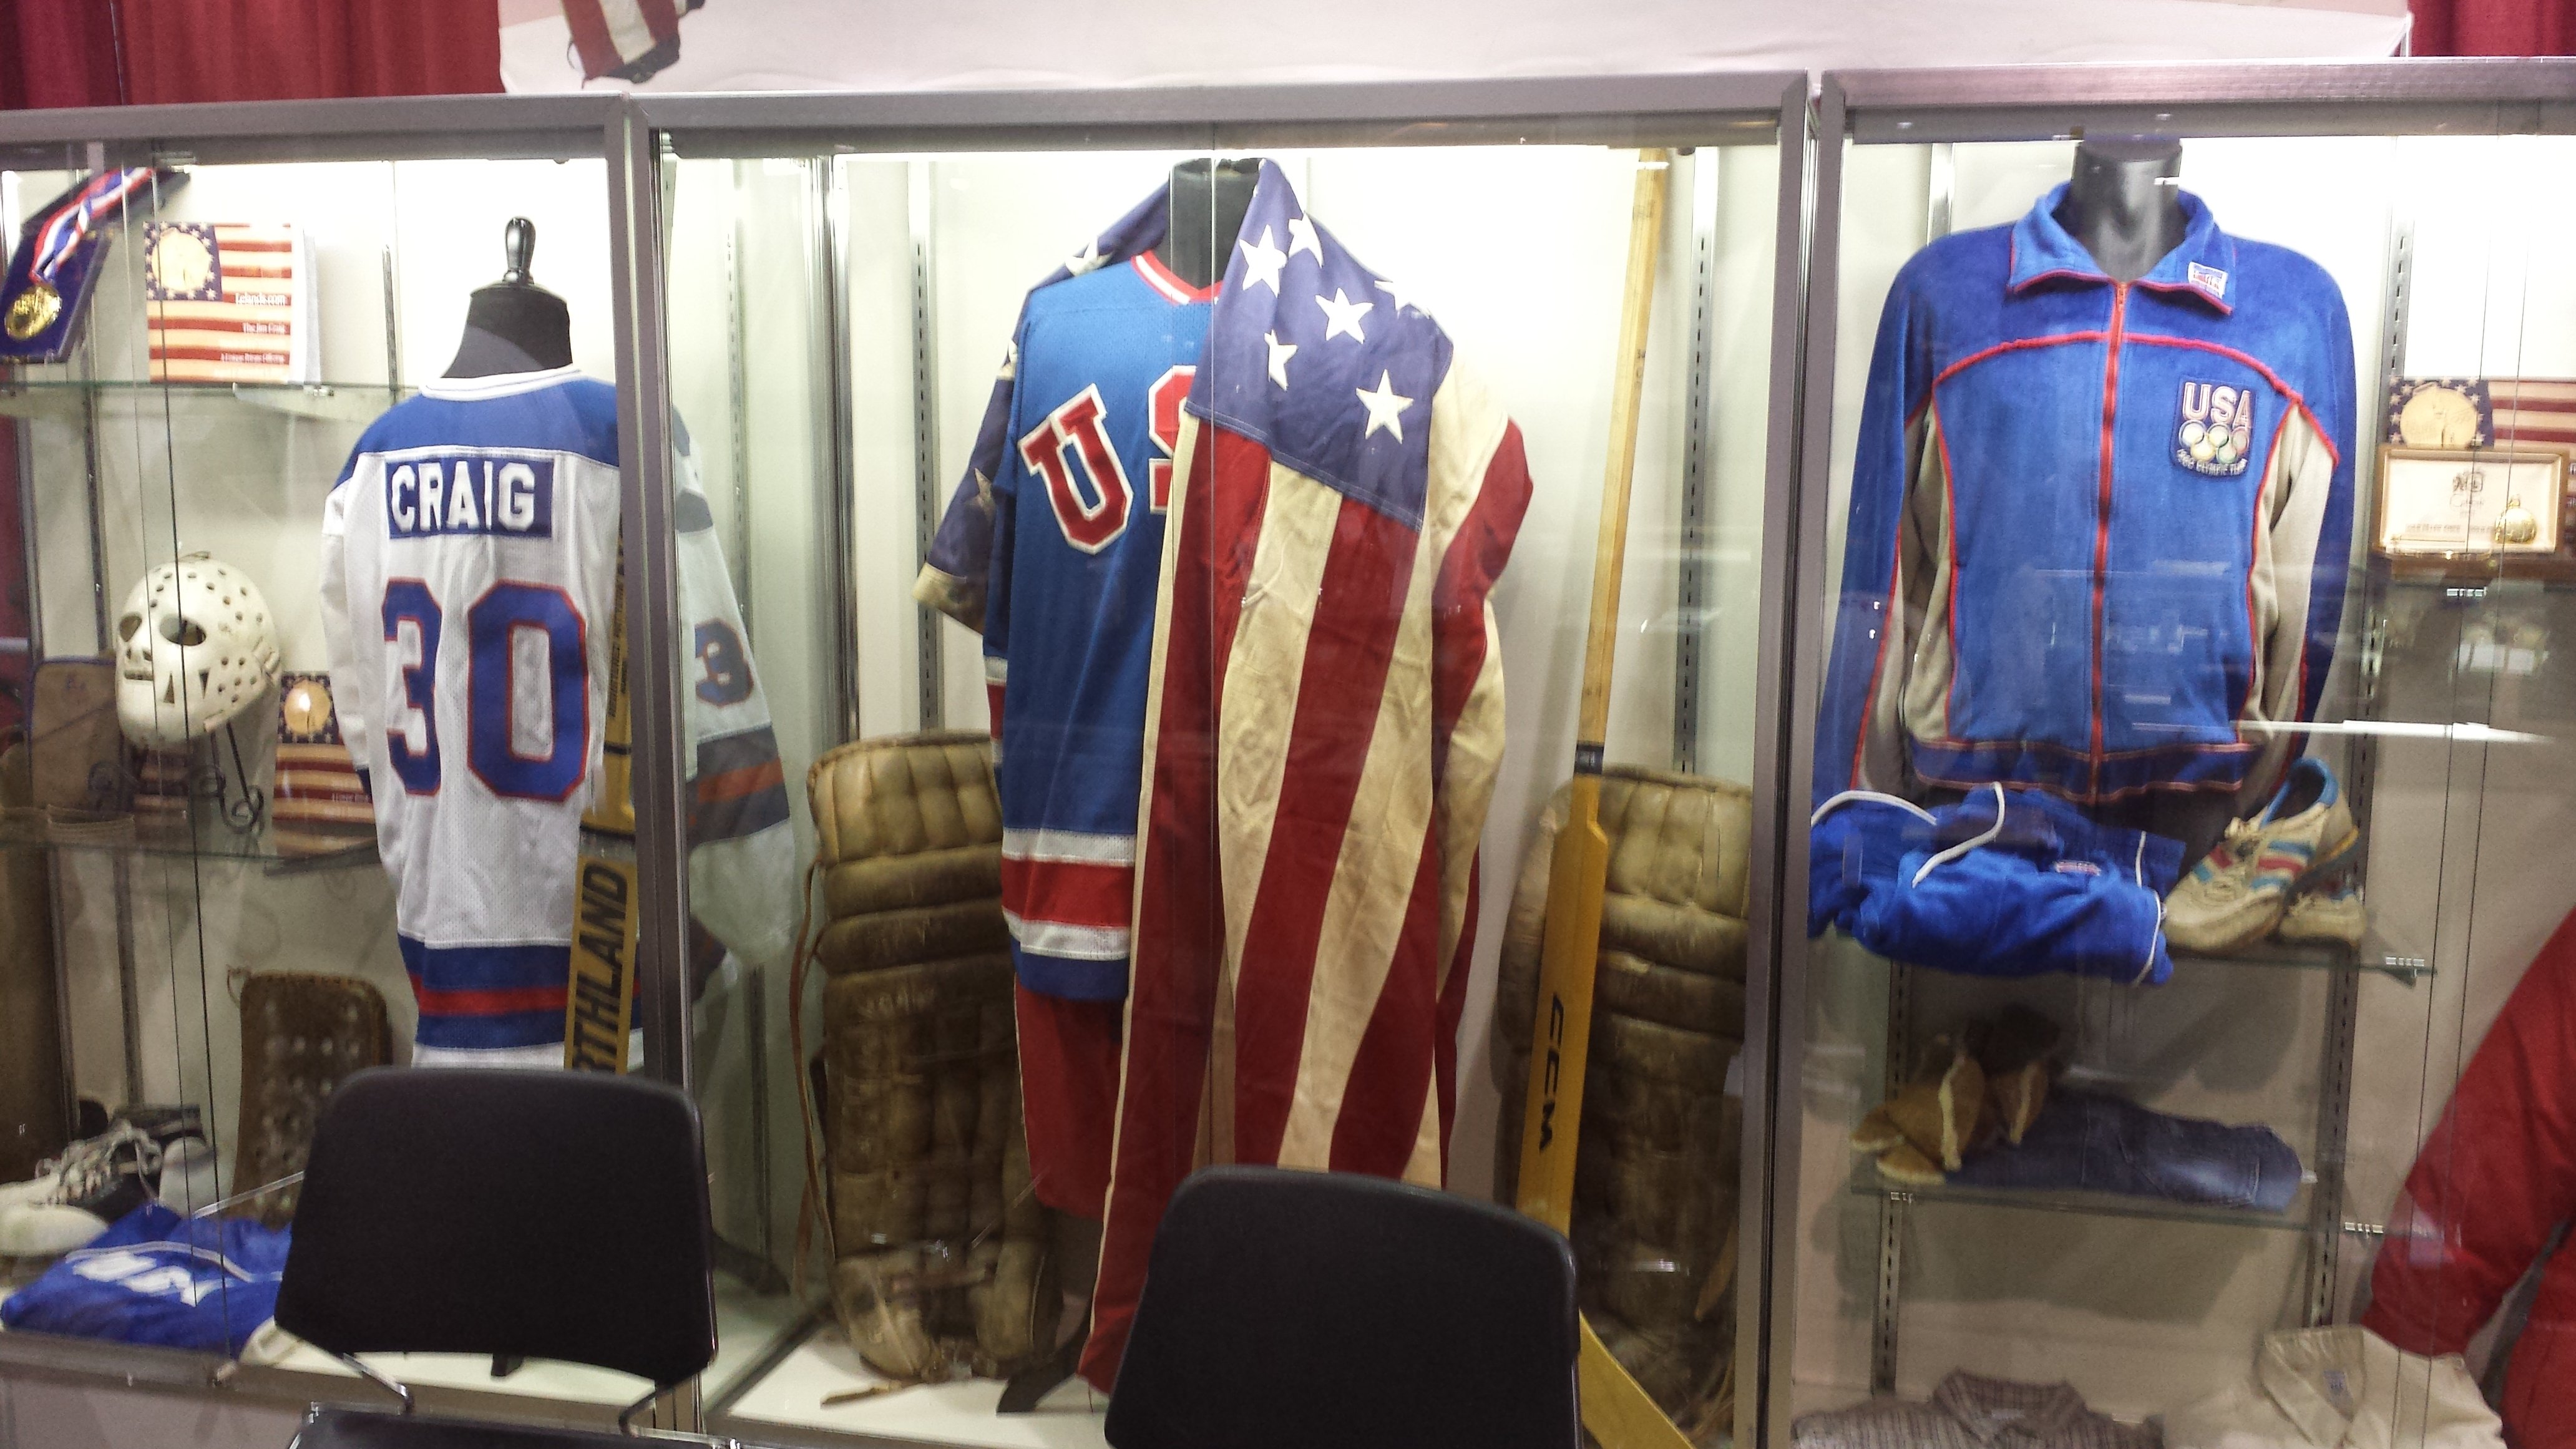 Jim Craig's 'Miracle on Ice' Memorabilia Up for Auction Again